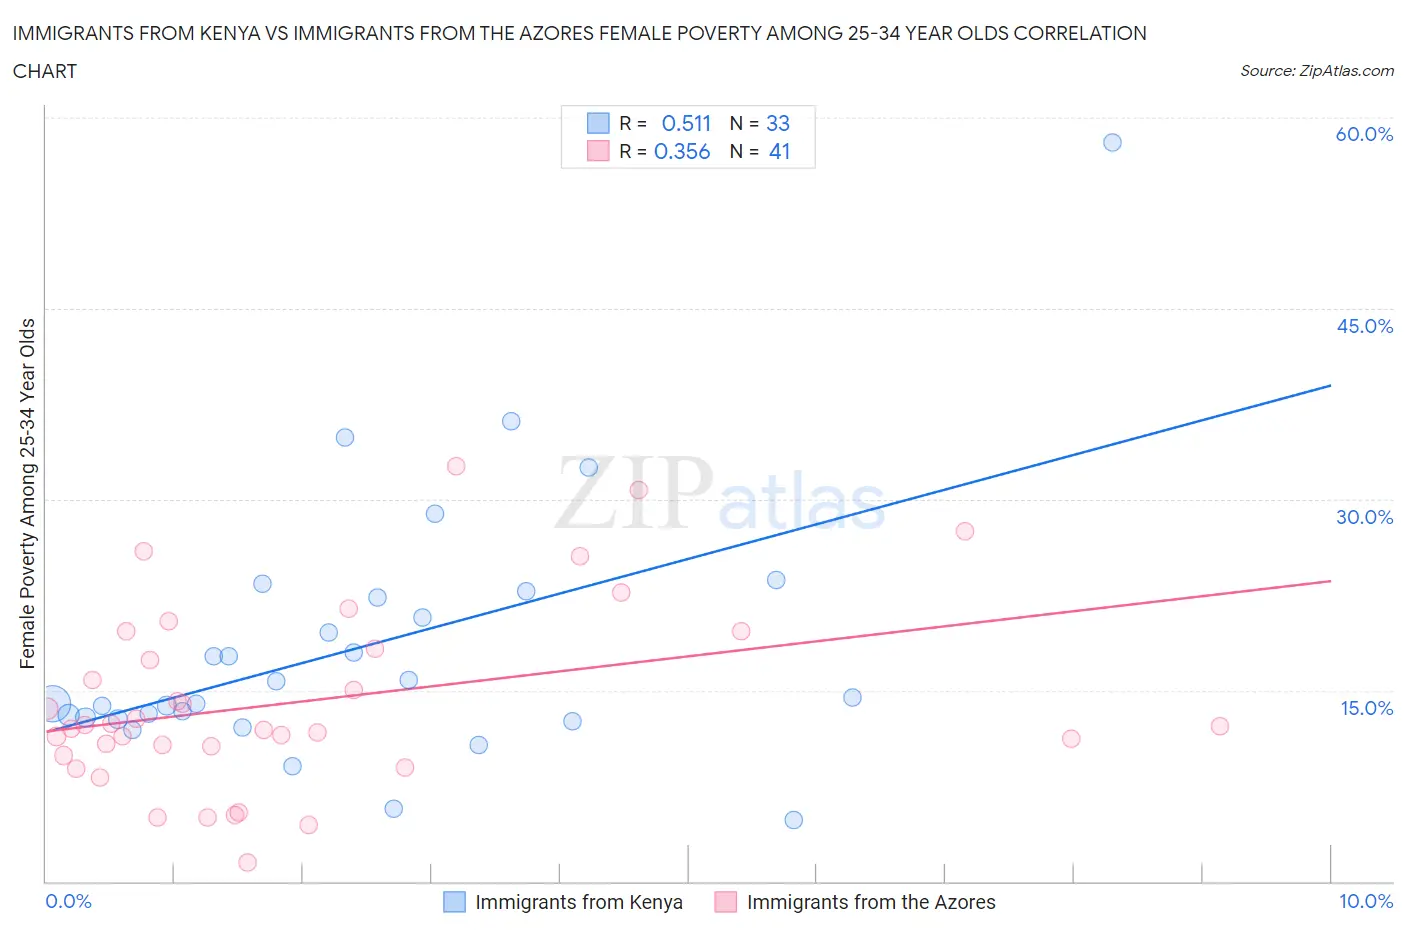 Immigrants from Kenya vs Immigrants from the Azores Female Poverty Among 25-34 Year Olds